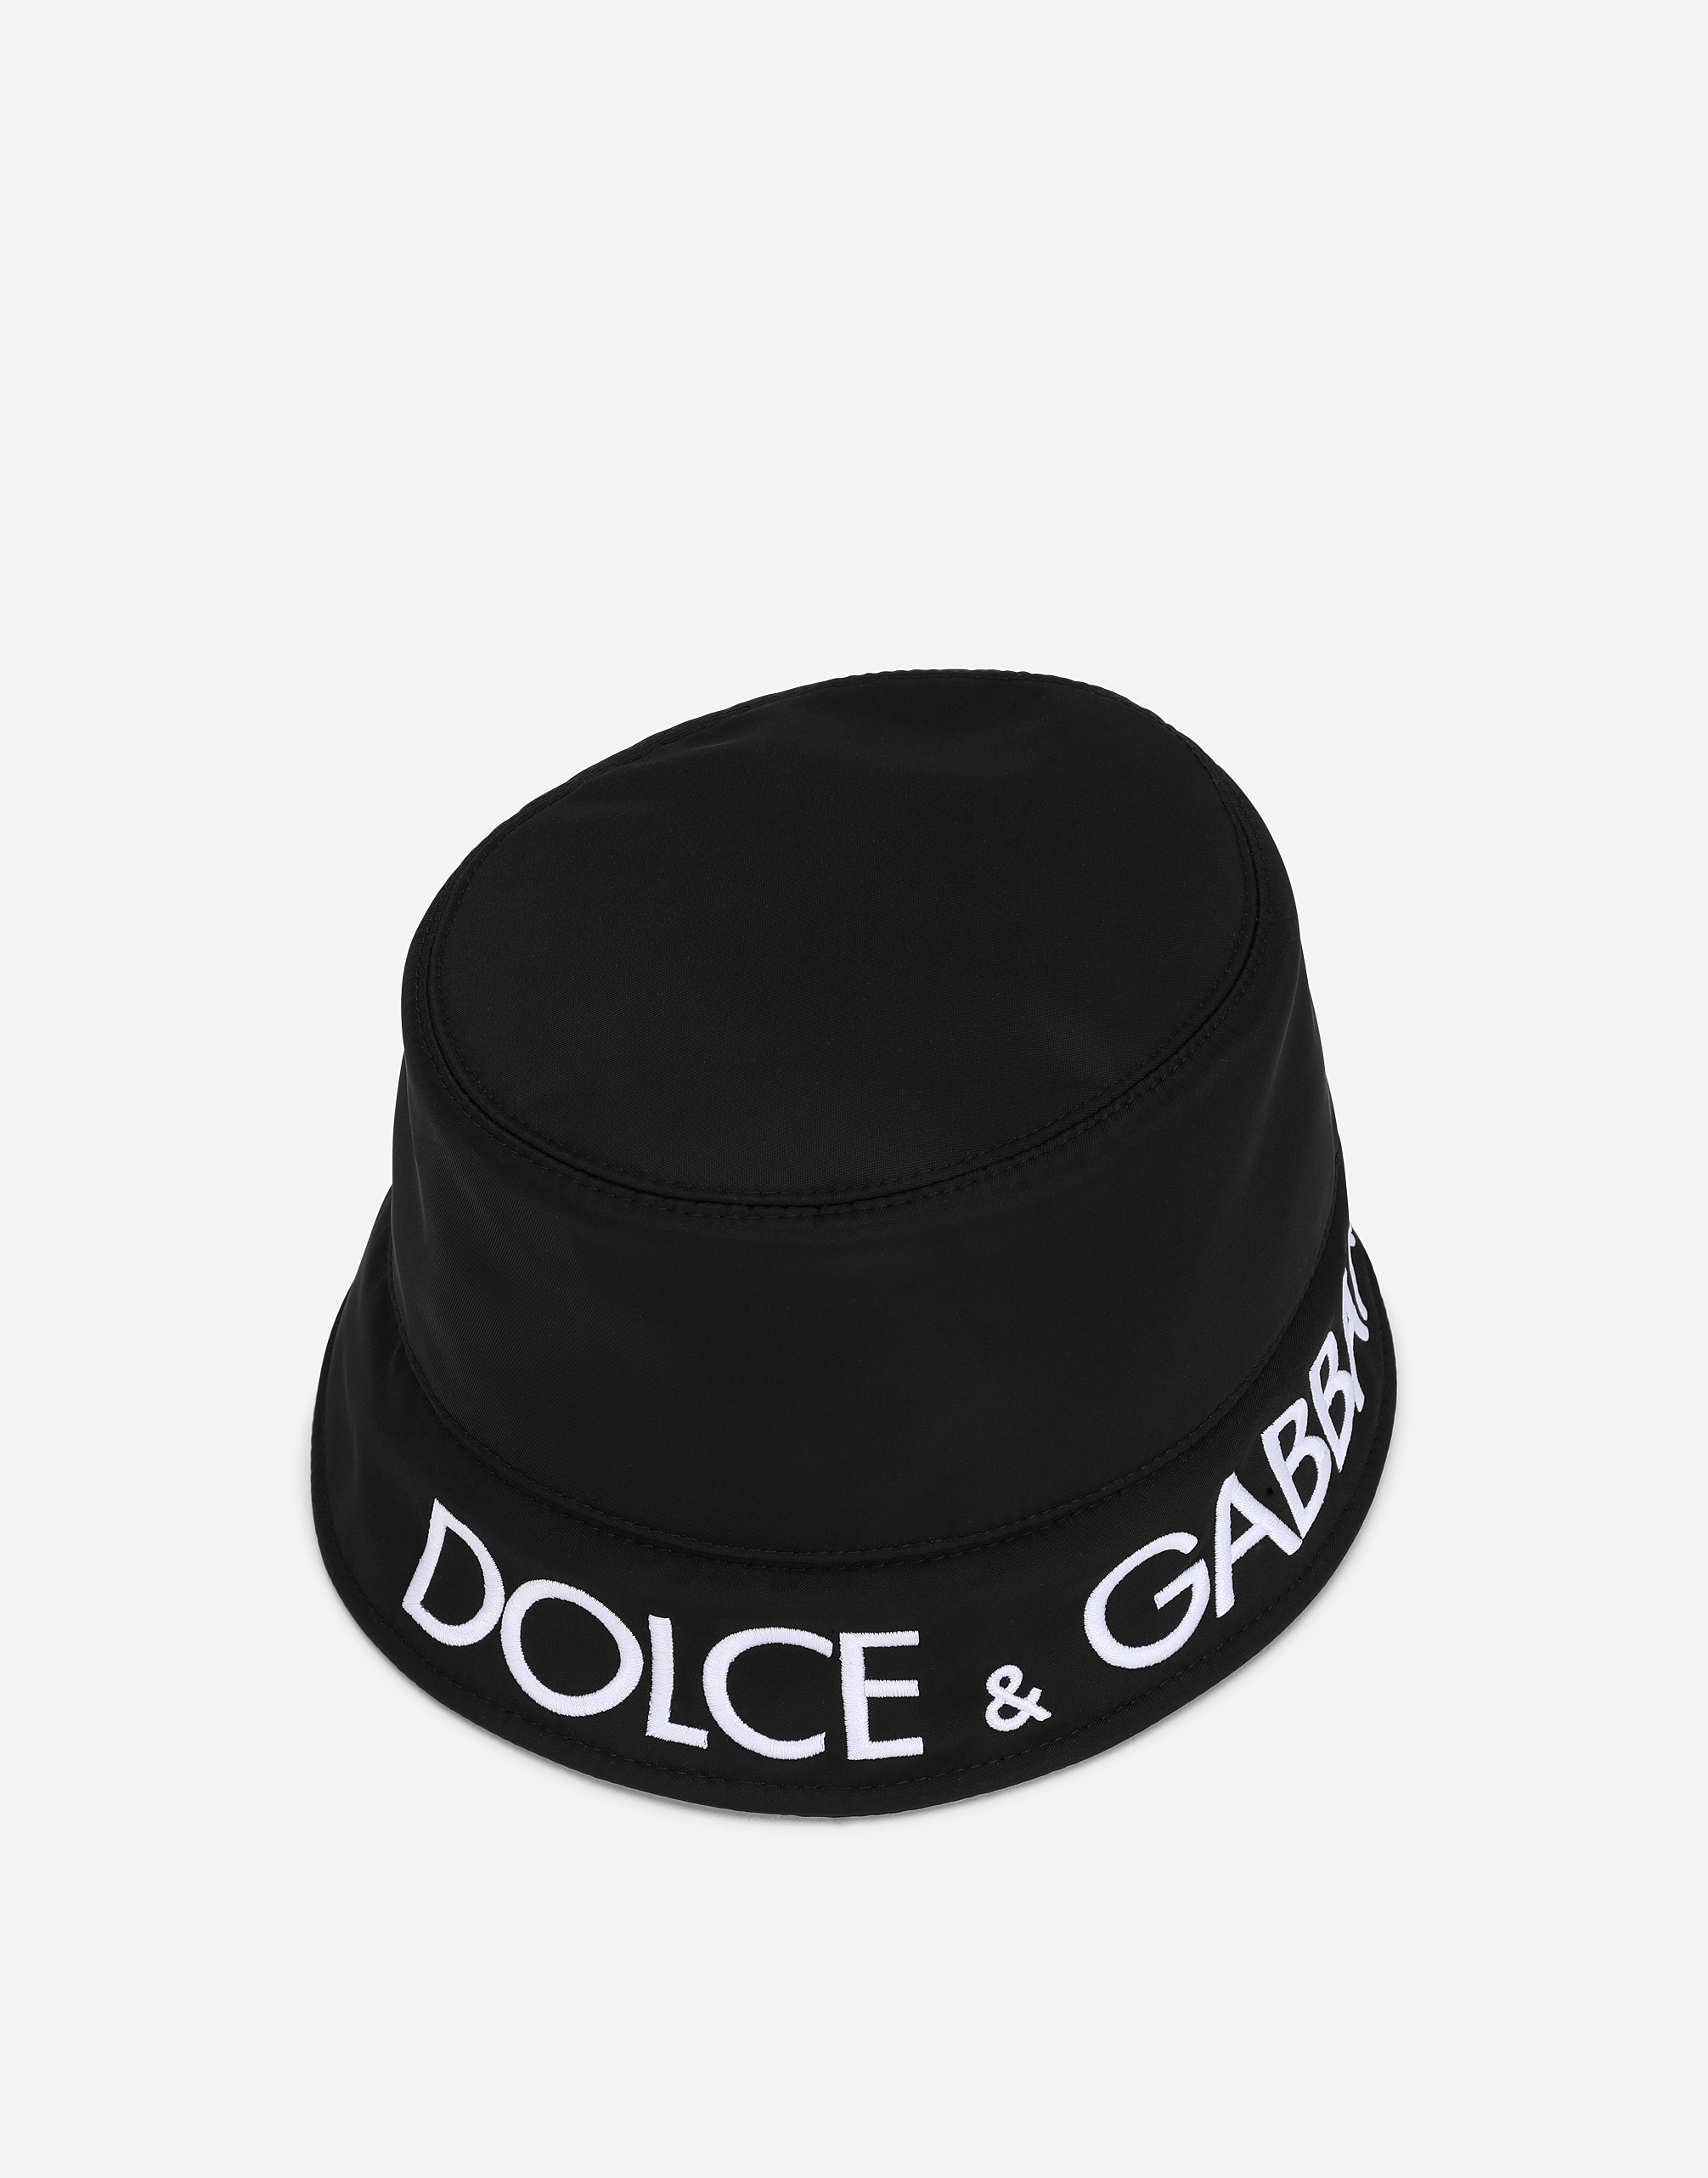 Nylon bucket hat with Dolce&Gabbana embroidery in Black for Men 